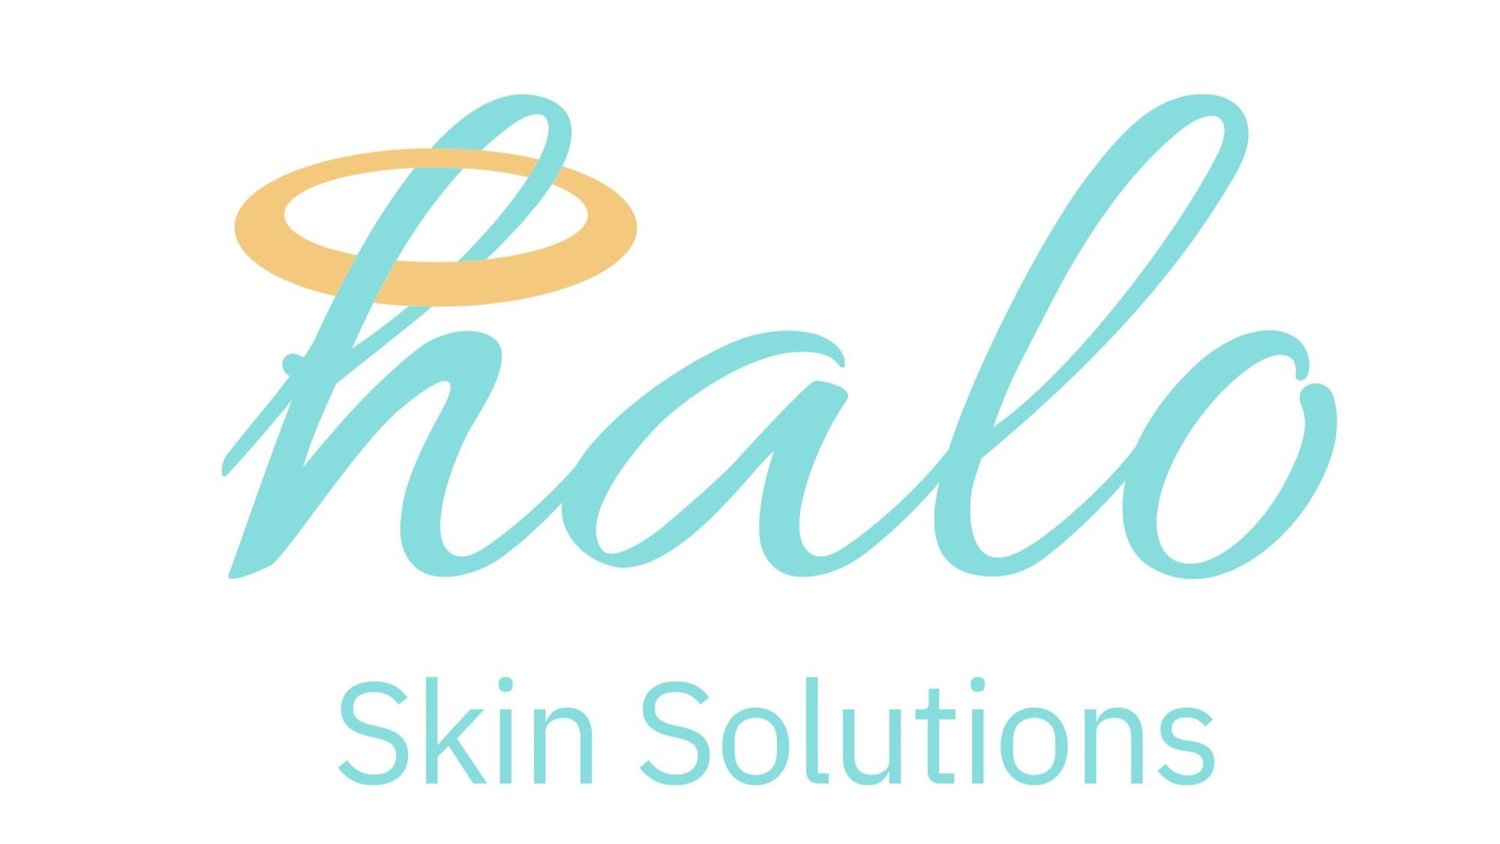 Halo Skin Solutions by Evie 